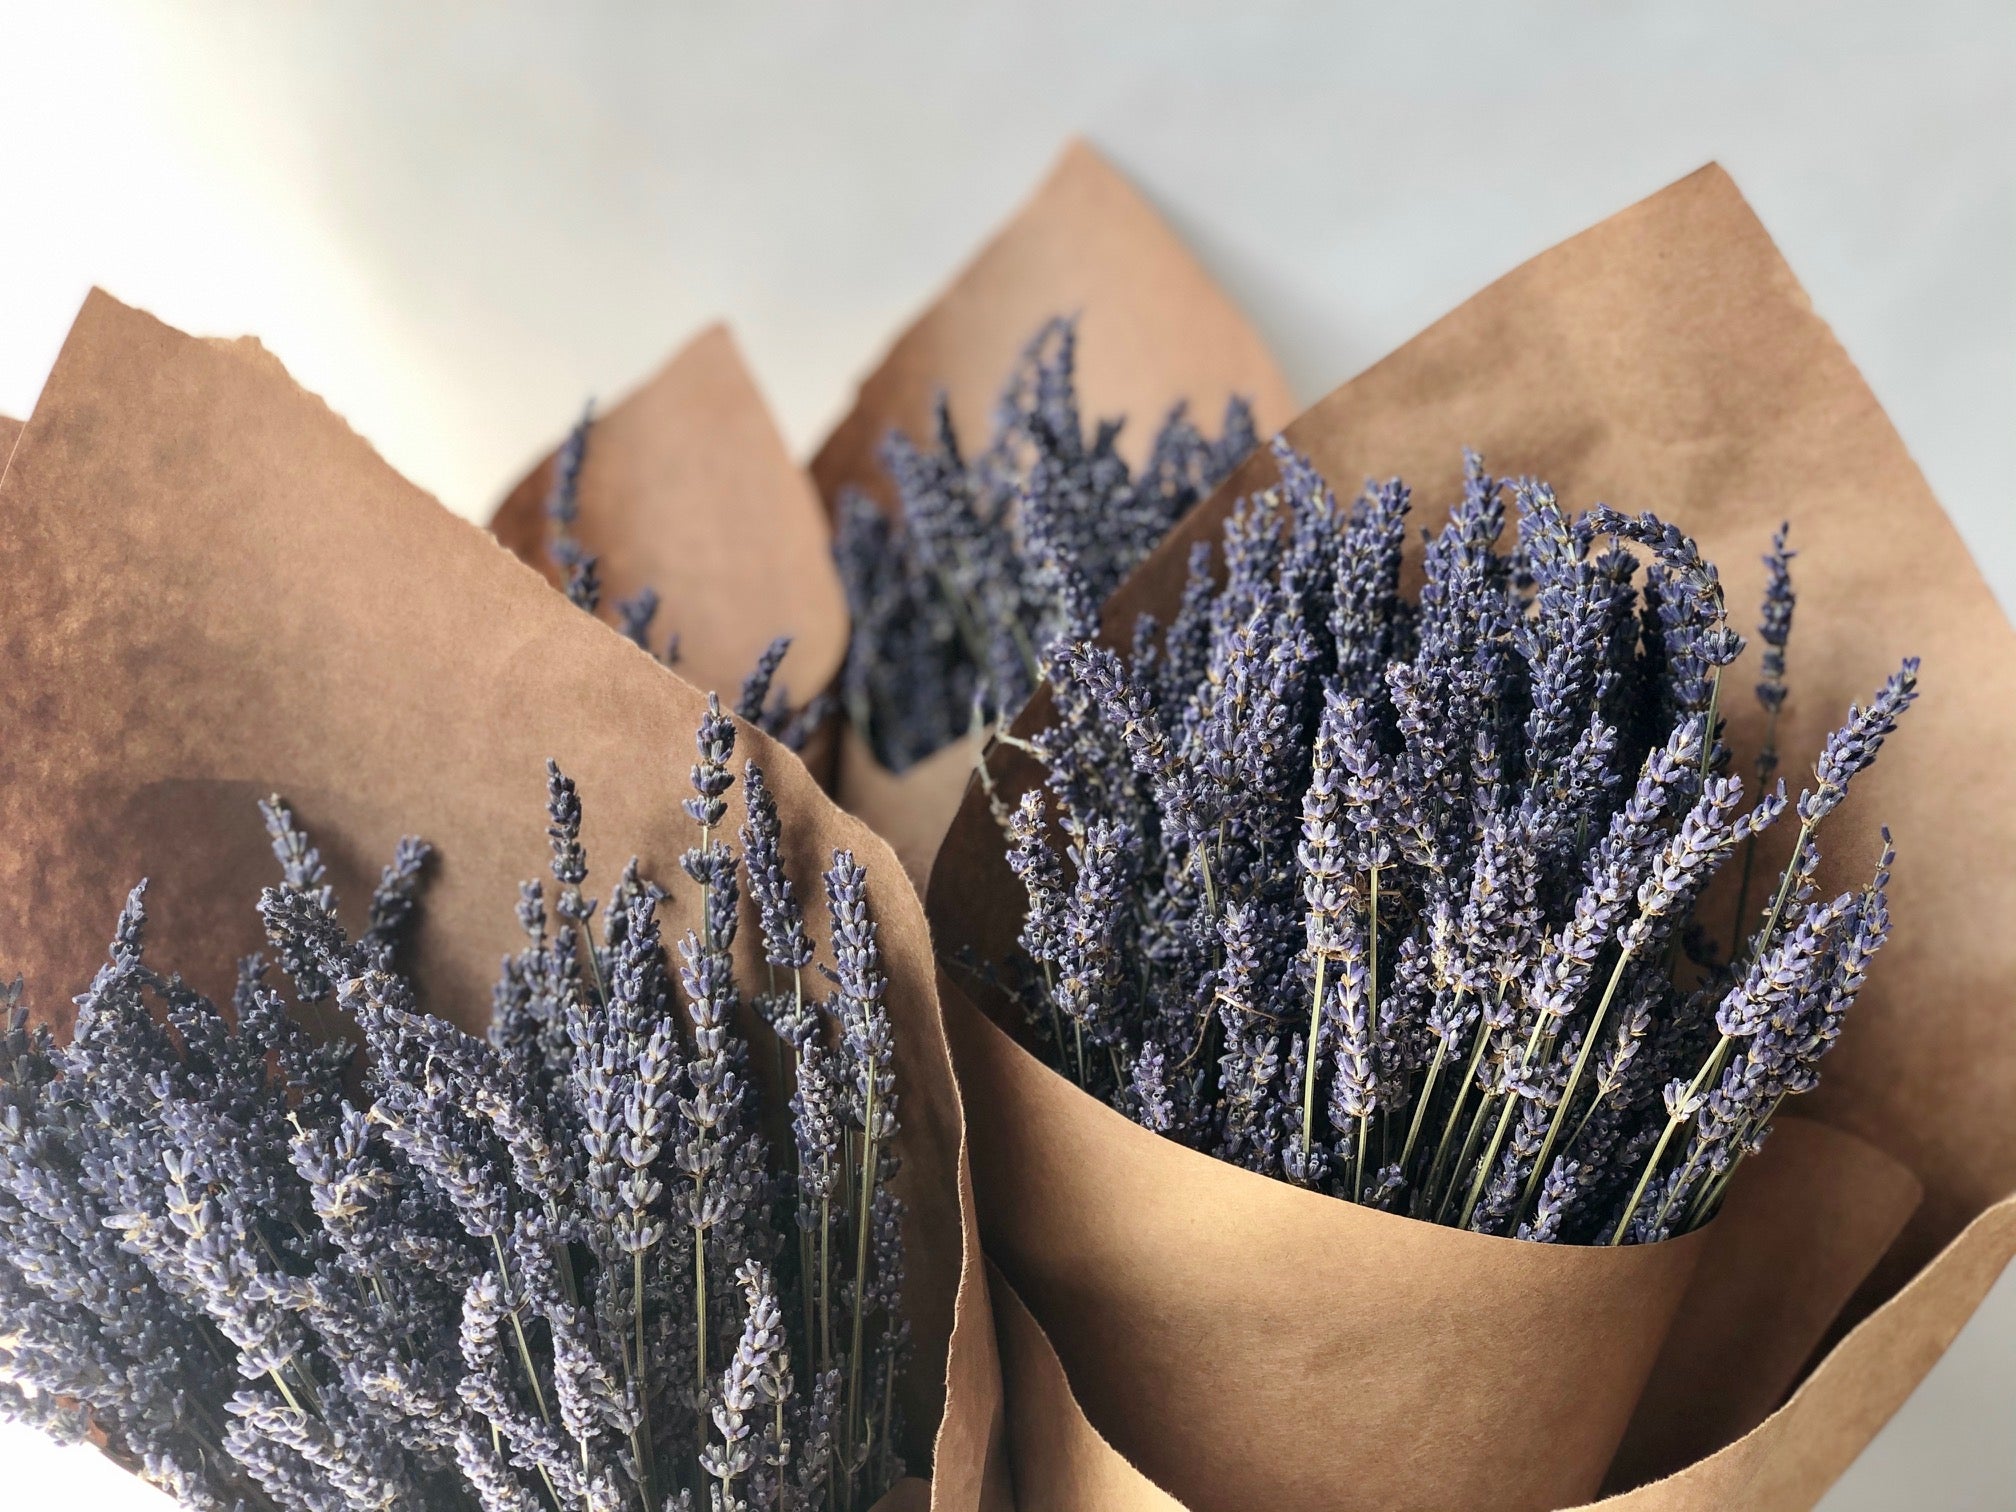 Dried Lavender from the South of France - Élan Flowers